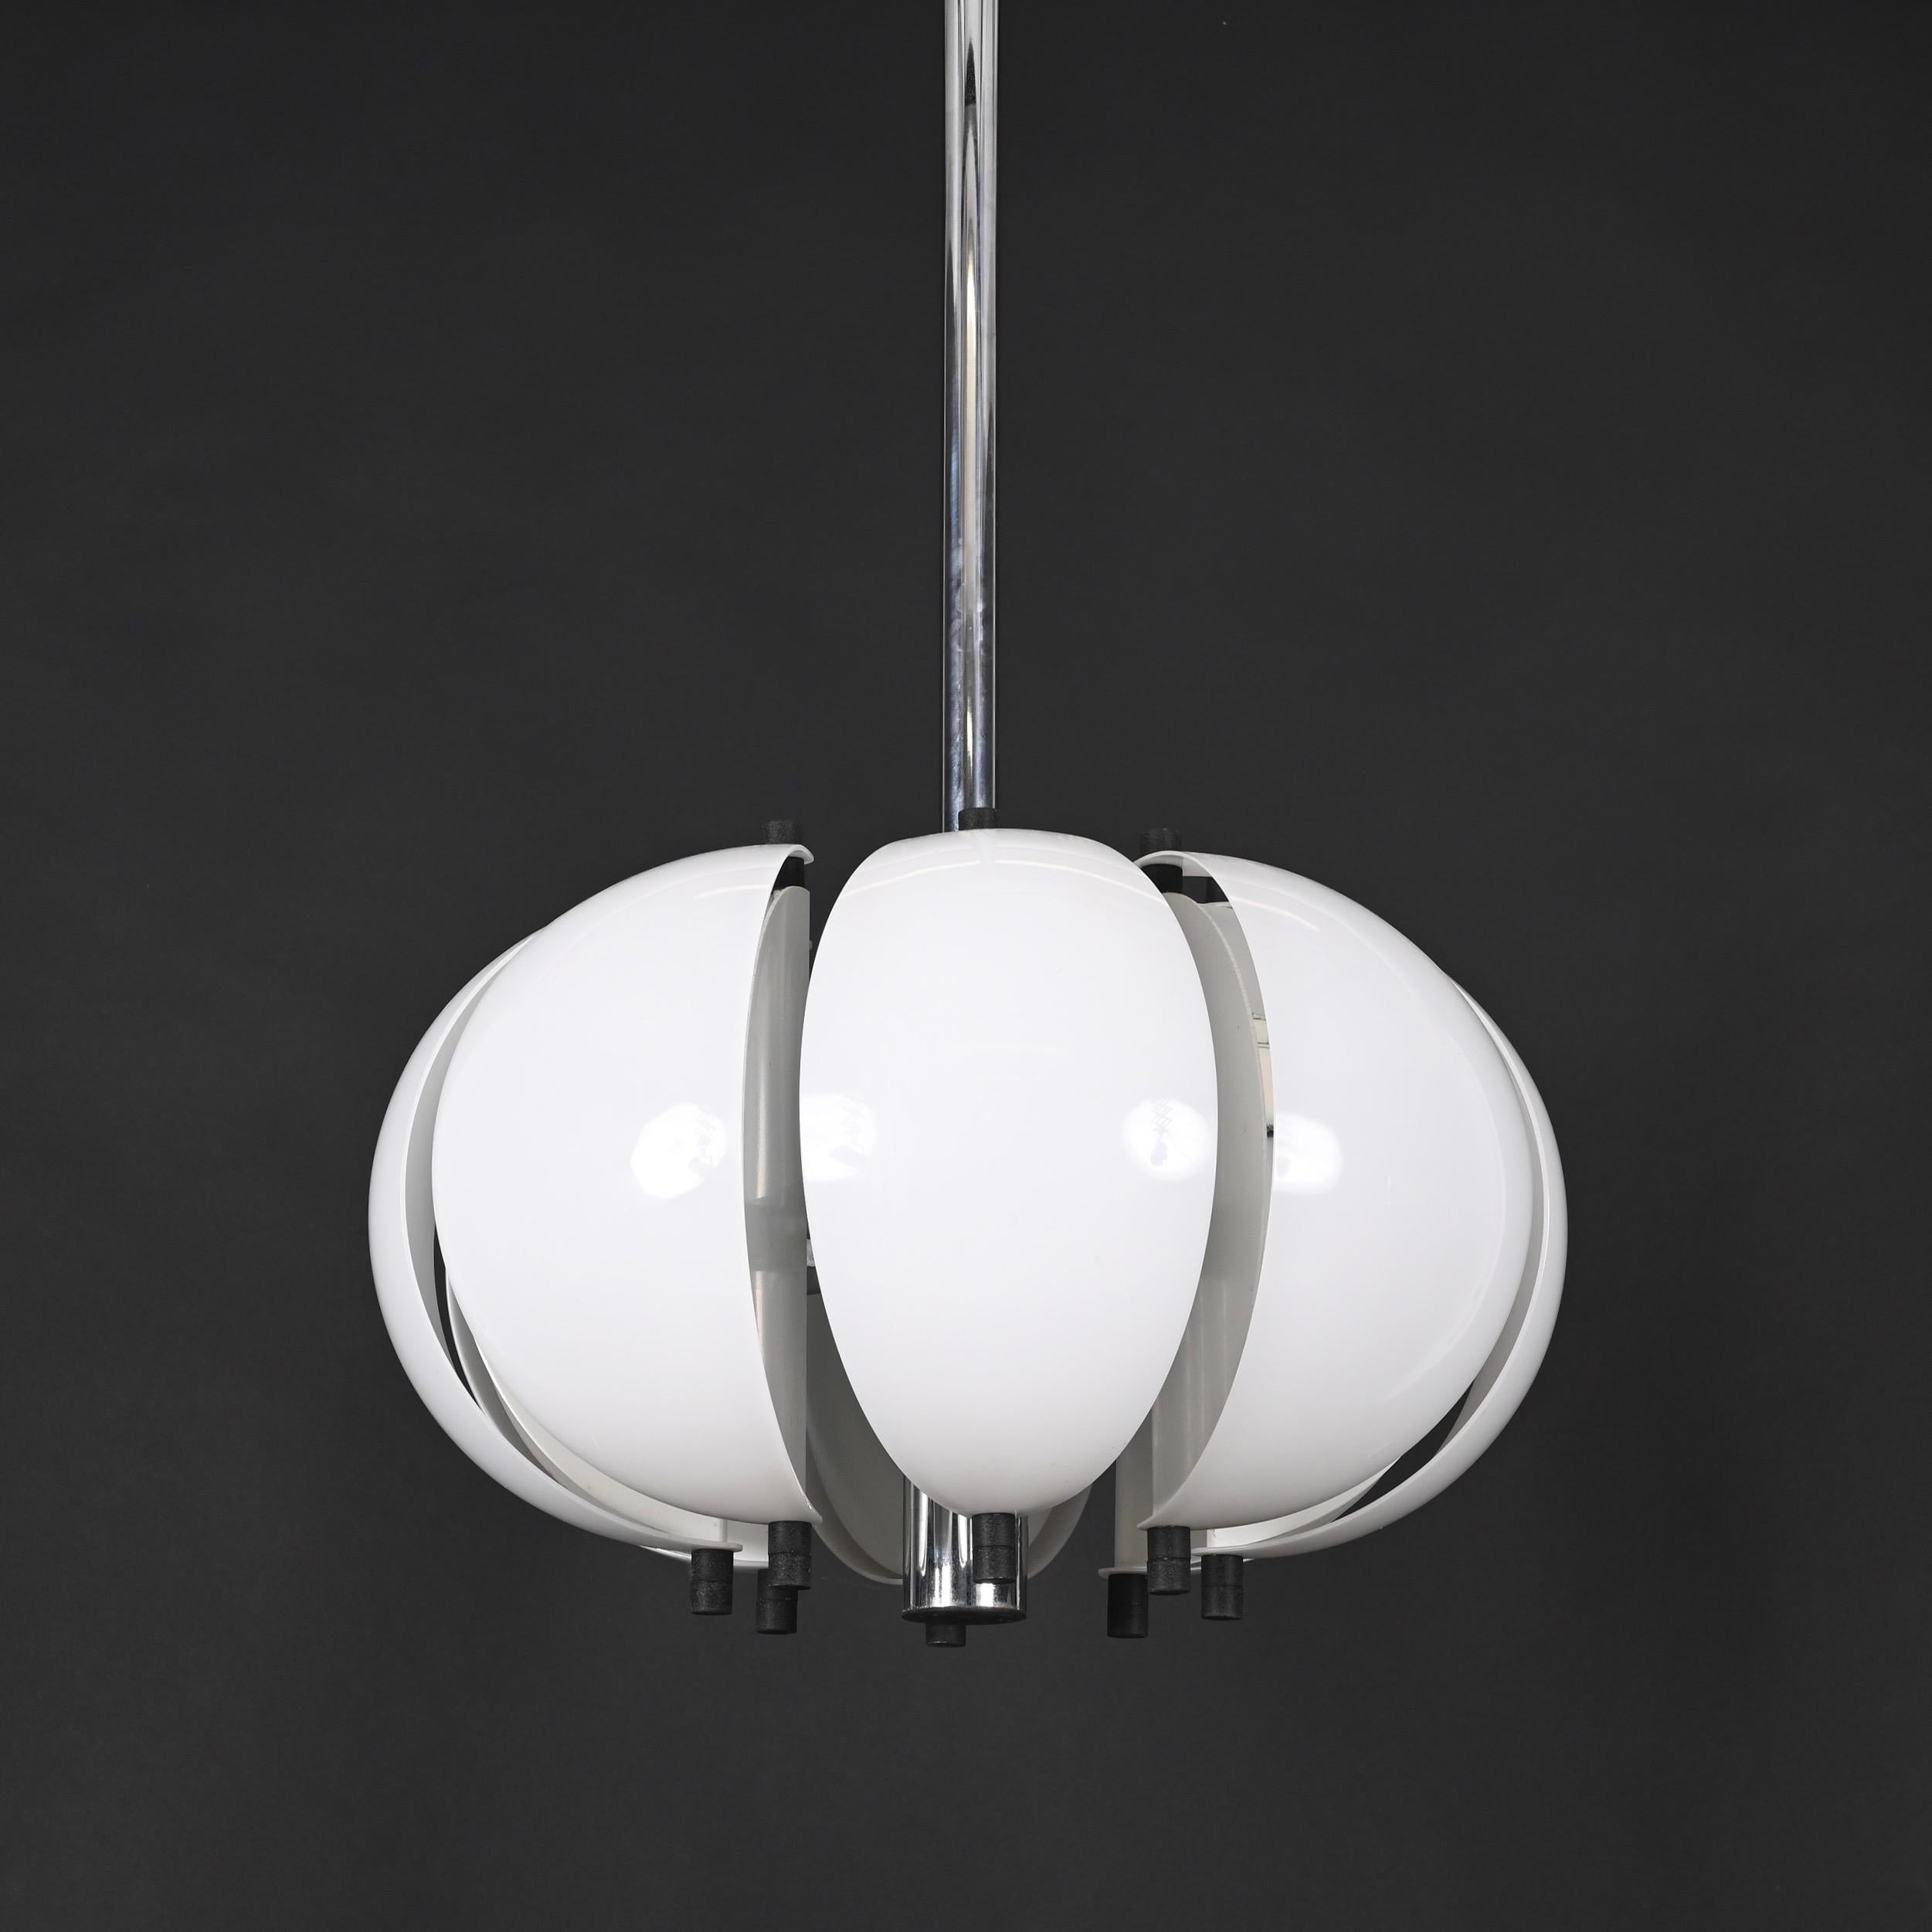 Amazing midcentury Spicchio chandelier with eight lights in white lucite and chrome. This outstanding piece was designed in Italy by Corrado & Danilo Aroldi for Stilnovo during the 1970s.

This suspension lamp has a solid structure in chromed metal,